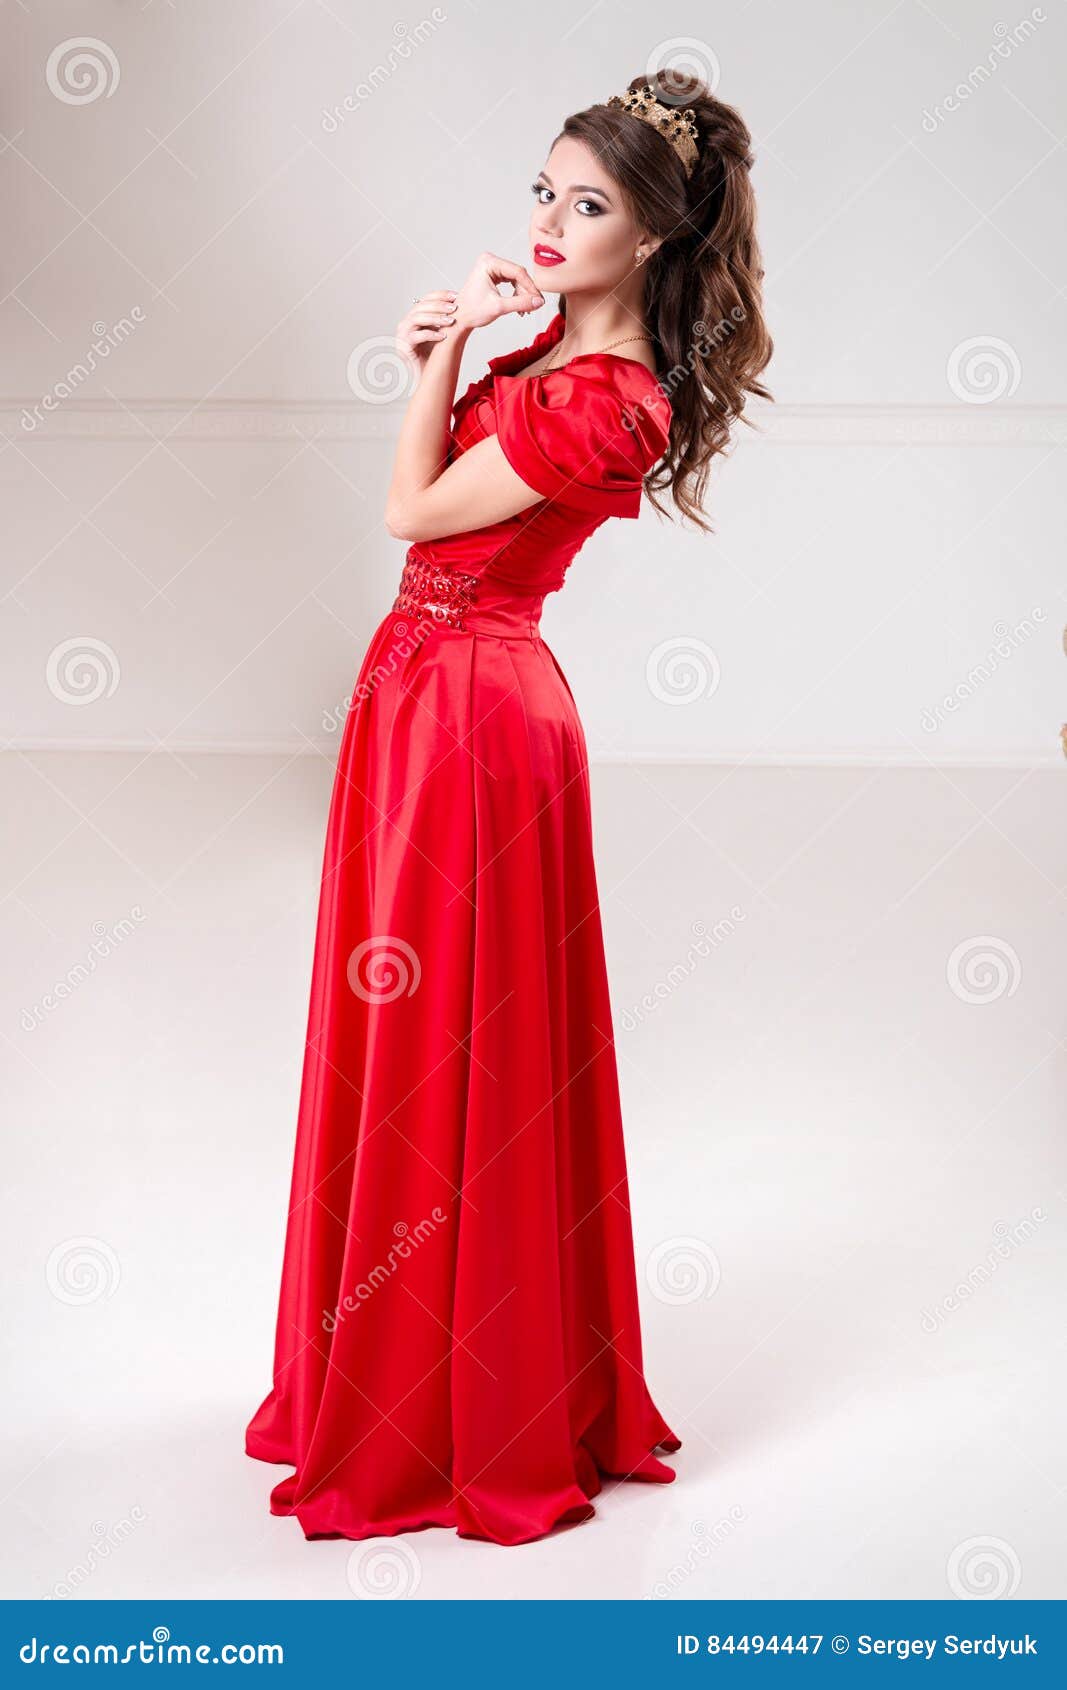 Elegant Woman in a Long Red Dress is Standing in a White Room Stock ...